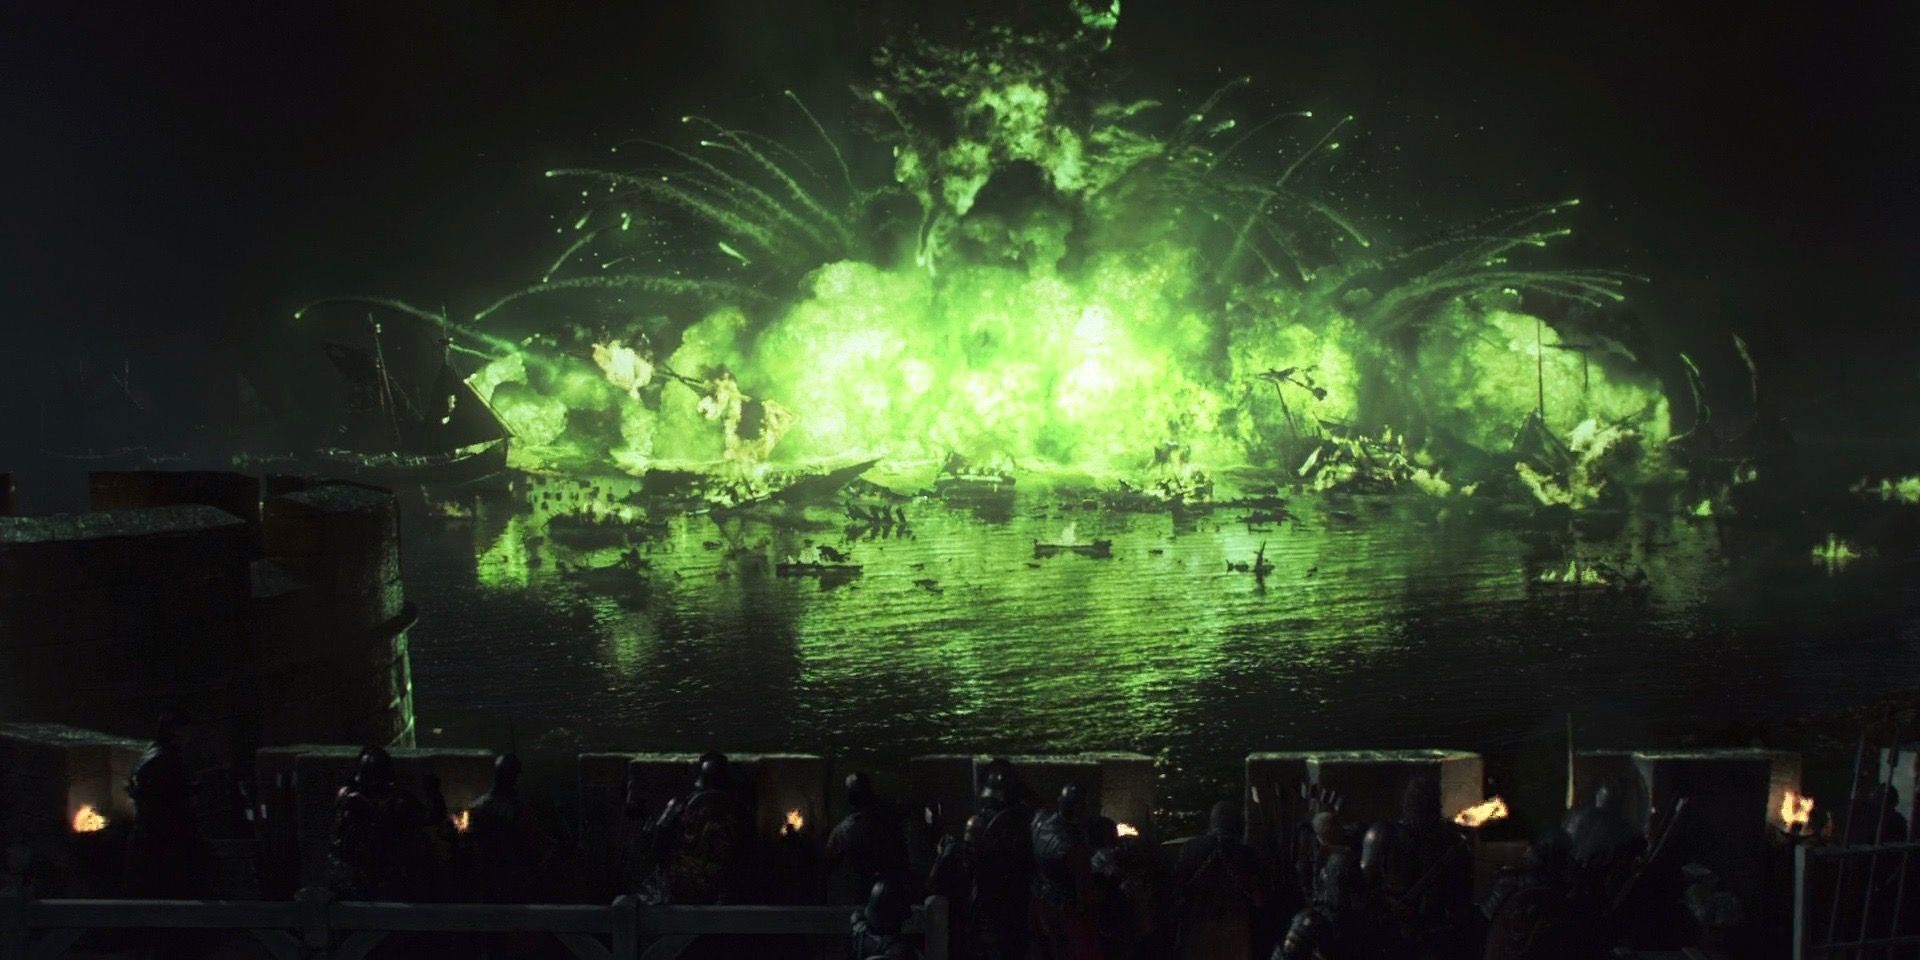 The ships explode with wildfire in the Battle of Blackwater in Game of Thrones